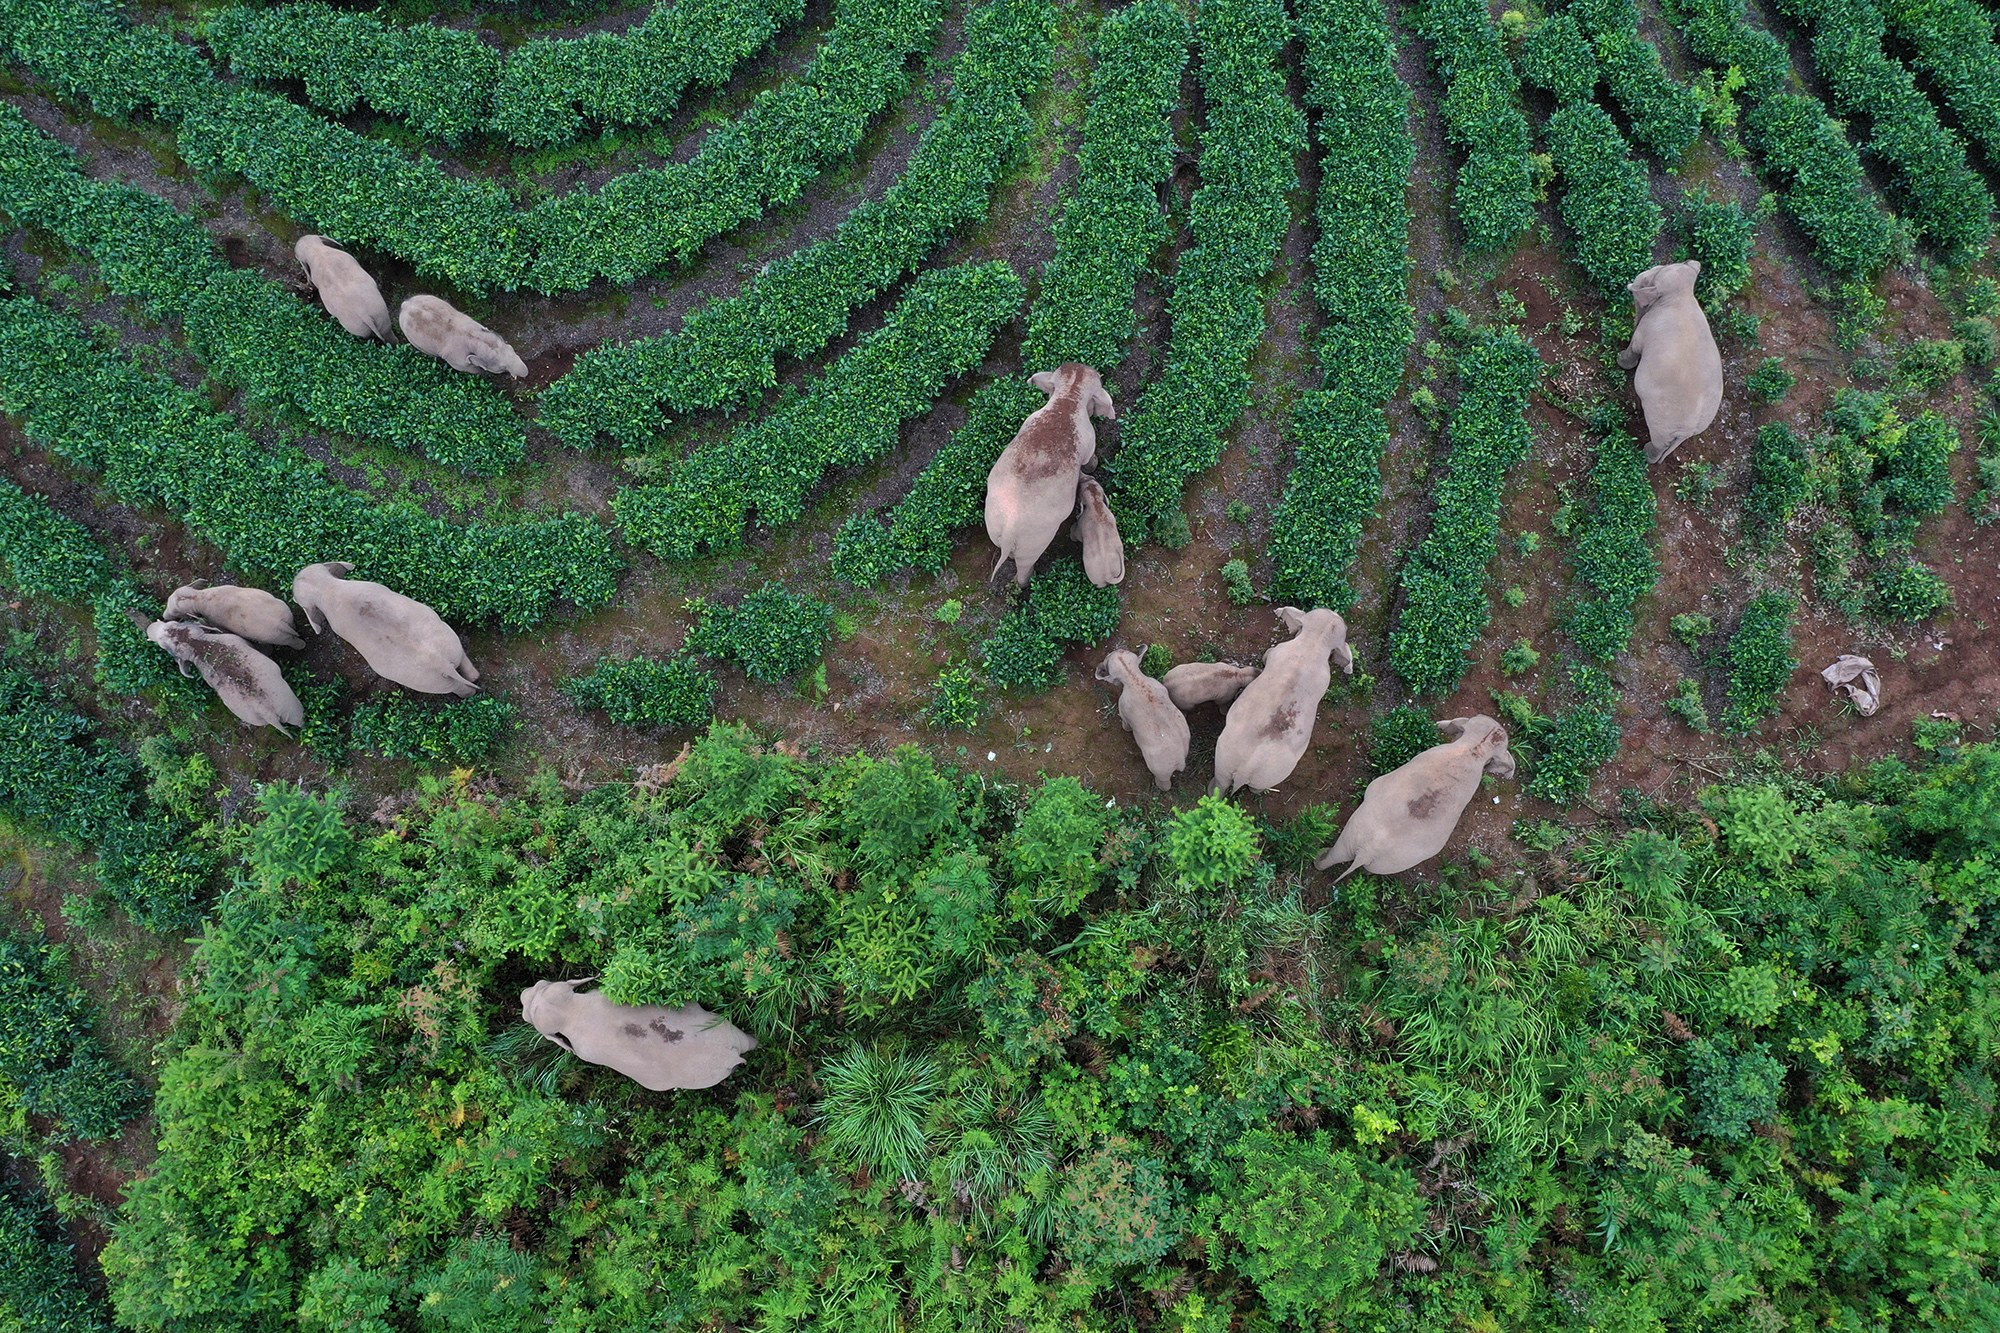 An aerial view of at least 13 elephants grazing in a field